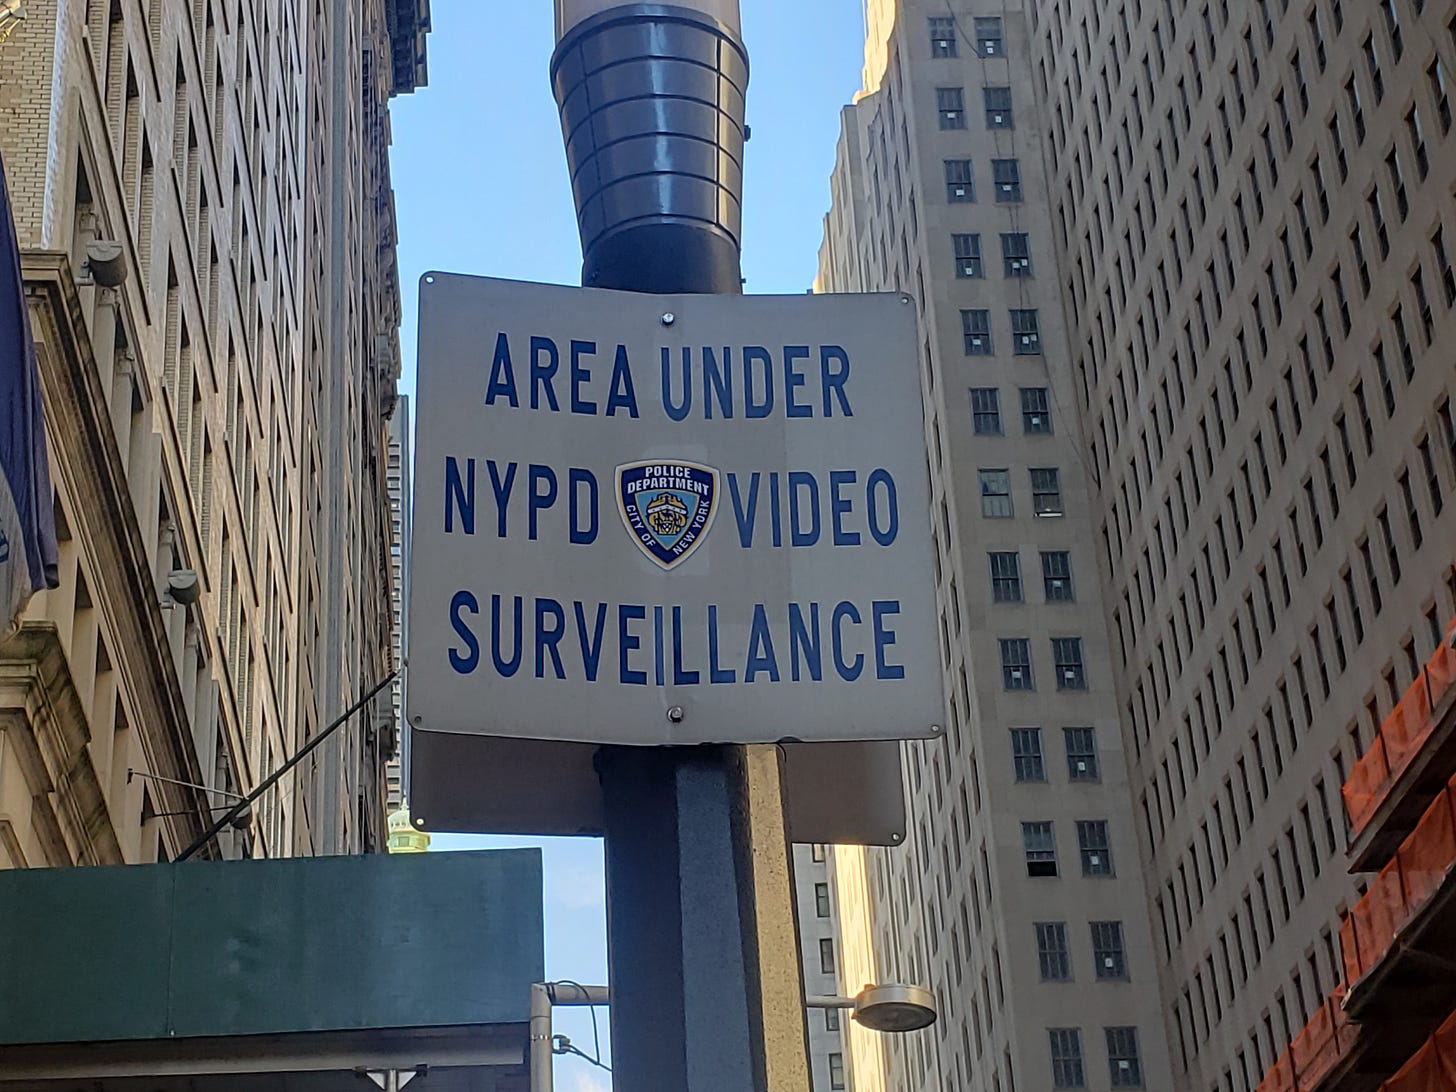 A photo of a sign with the NYPD shield, which states Area Under NYPD Video Surveillance